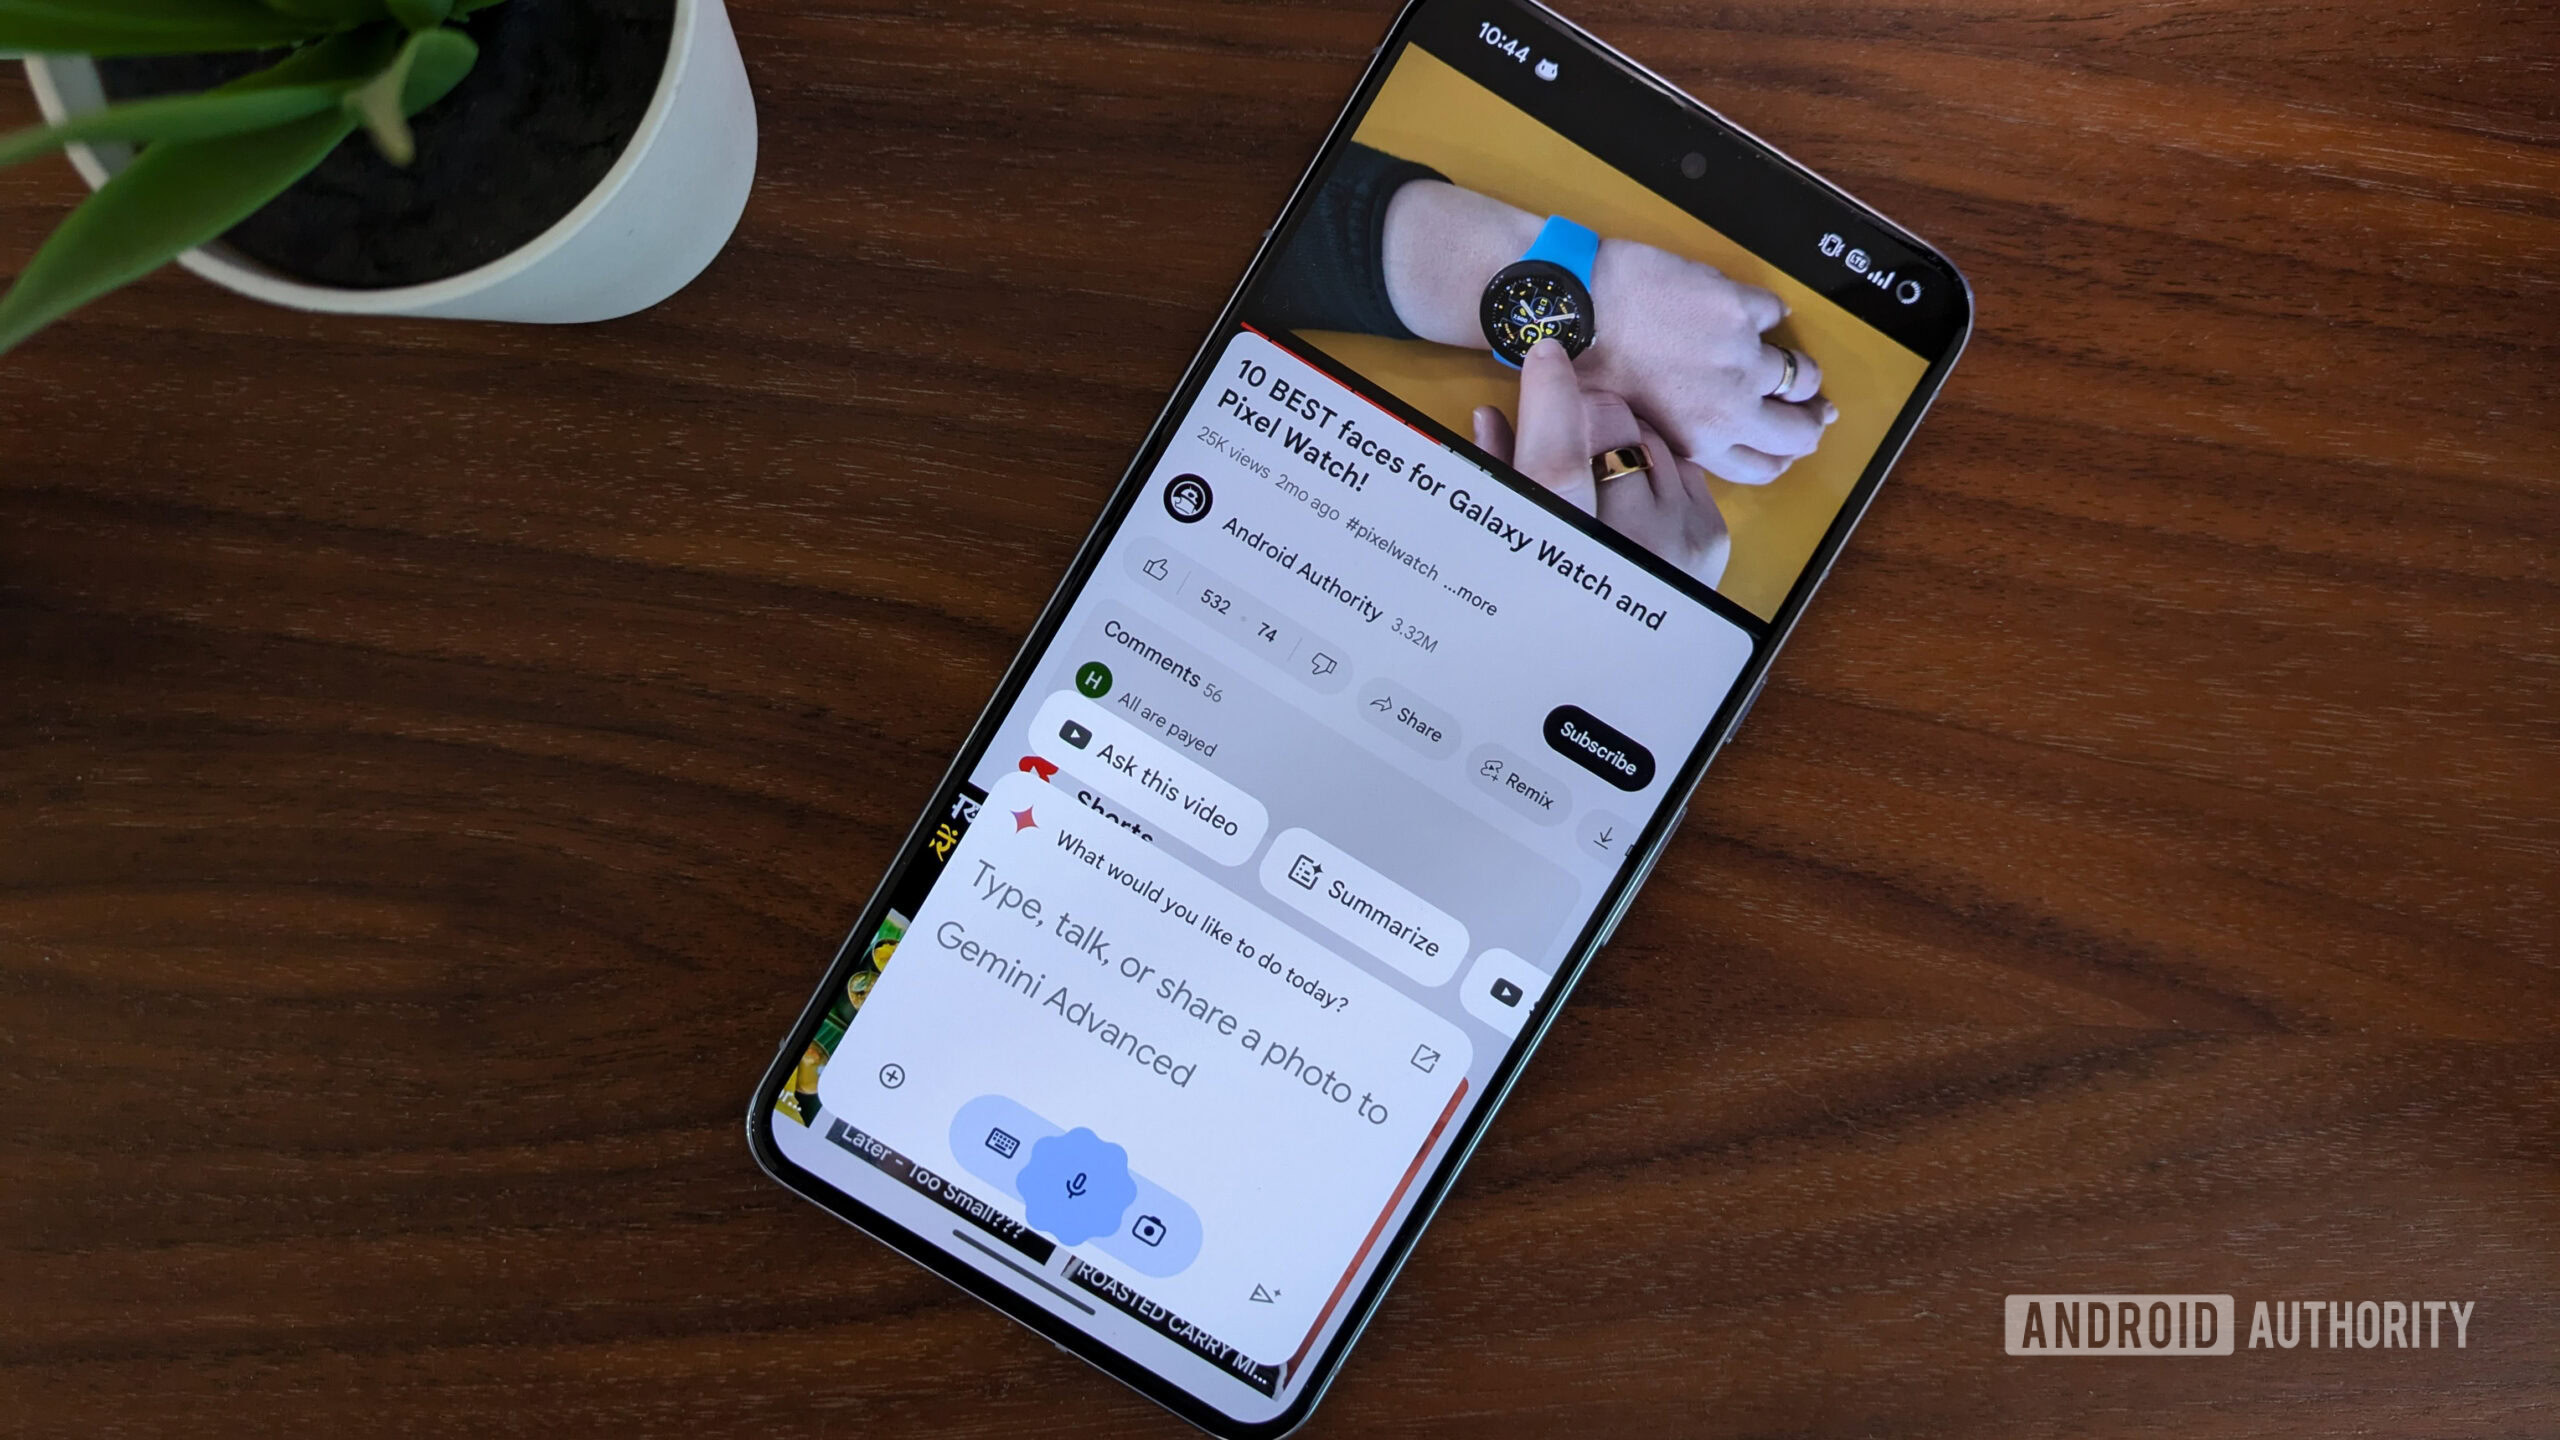 Google Gemini ‘Ask This Video’ hands-on: The power of YouTube in a snap